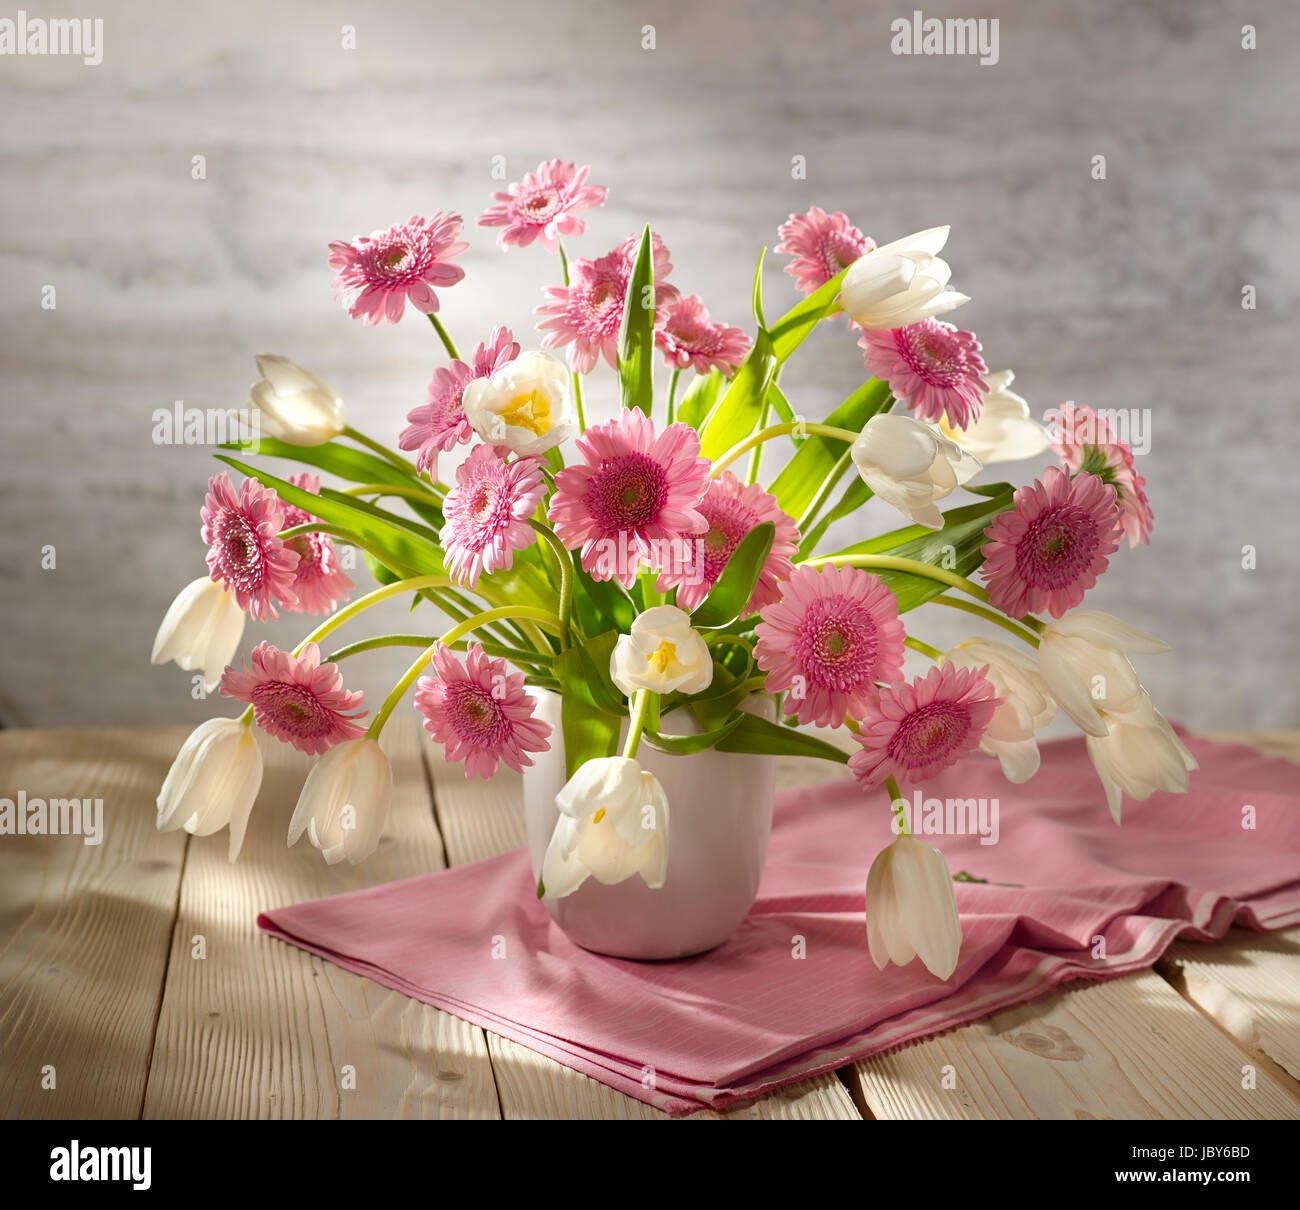 Bouquet of flowers with tulips and gerberas. Stock Photo